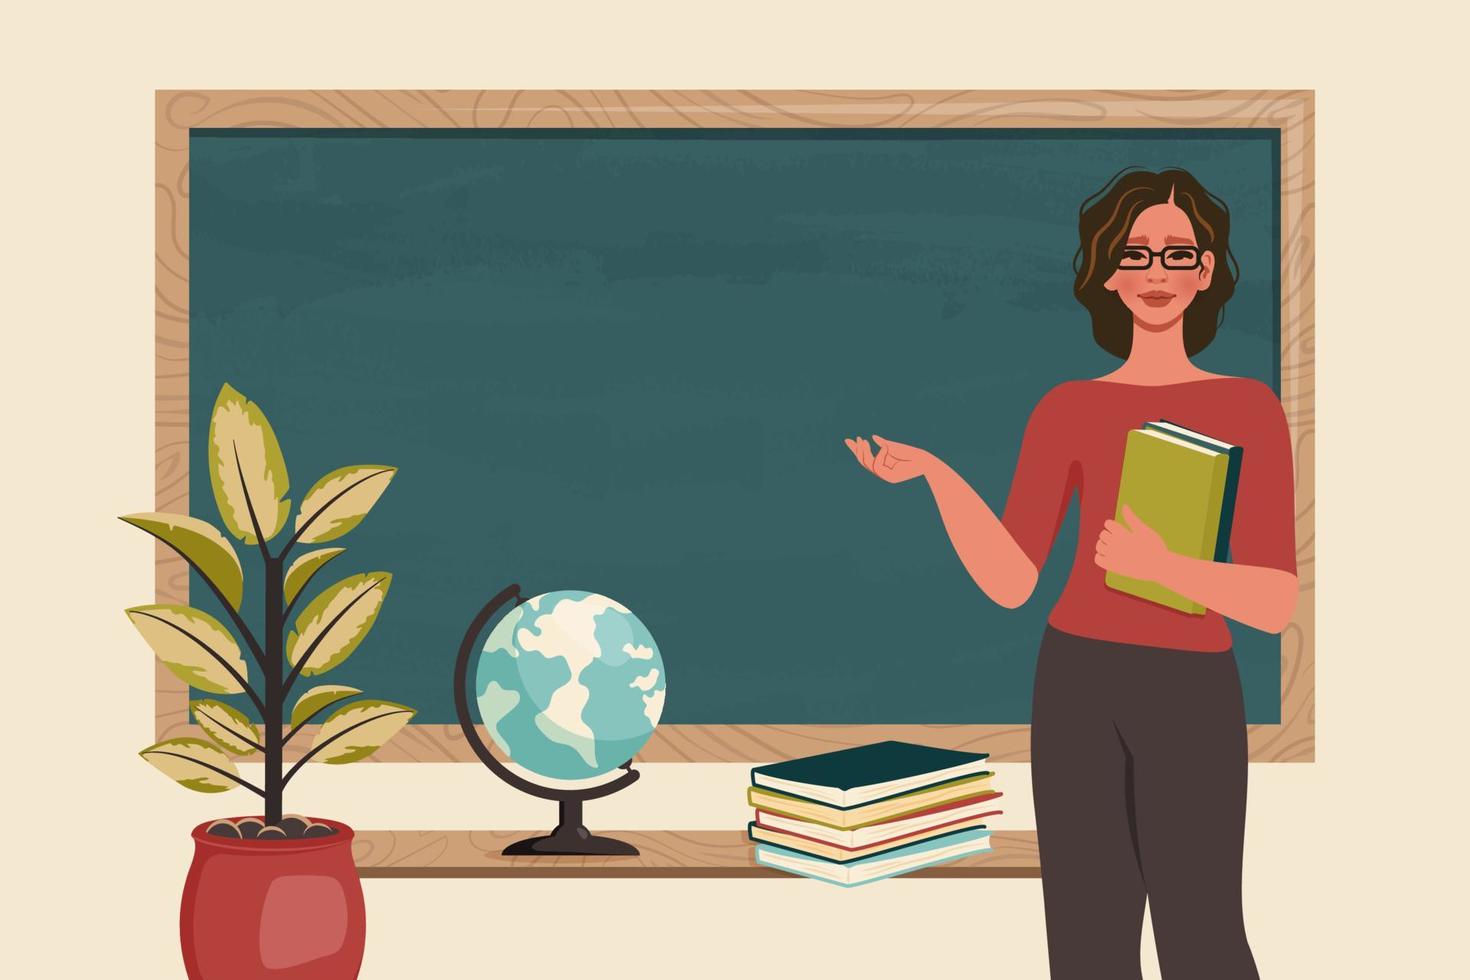 Female school teacher in classroom. Smiling young woman standing beside blackboard,  teaching lesson. Education, knowledge concept. School banner. Vector cartoon illustration